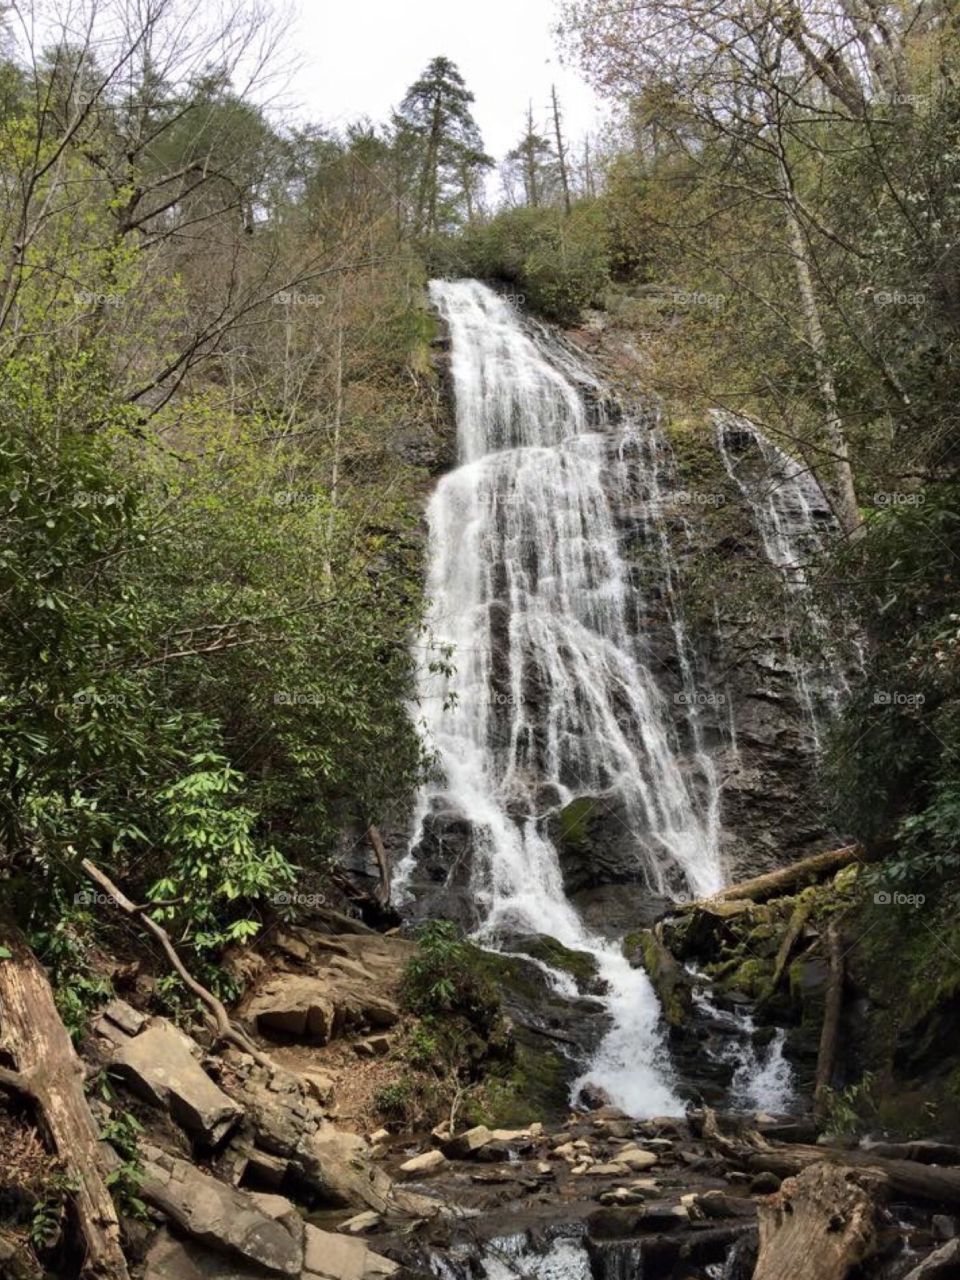 One of the many waterfalls in the Great Smoky Mountains , Tennessee .